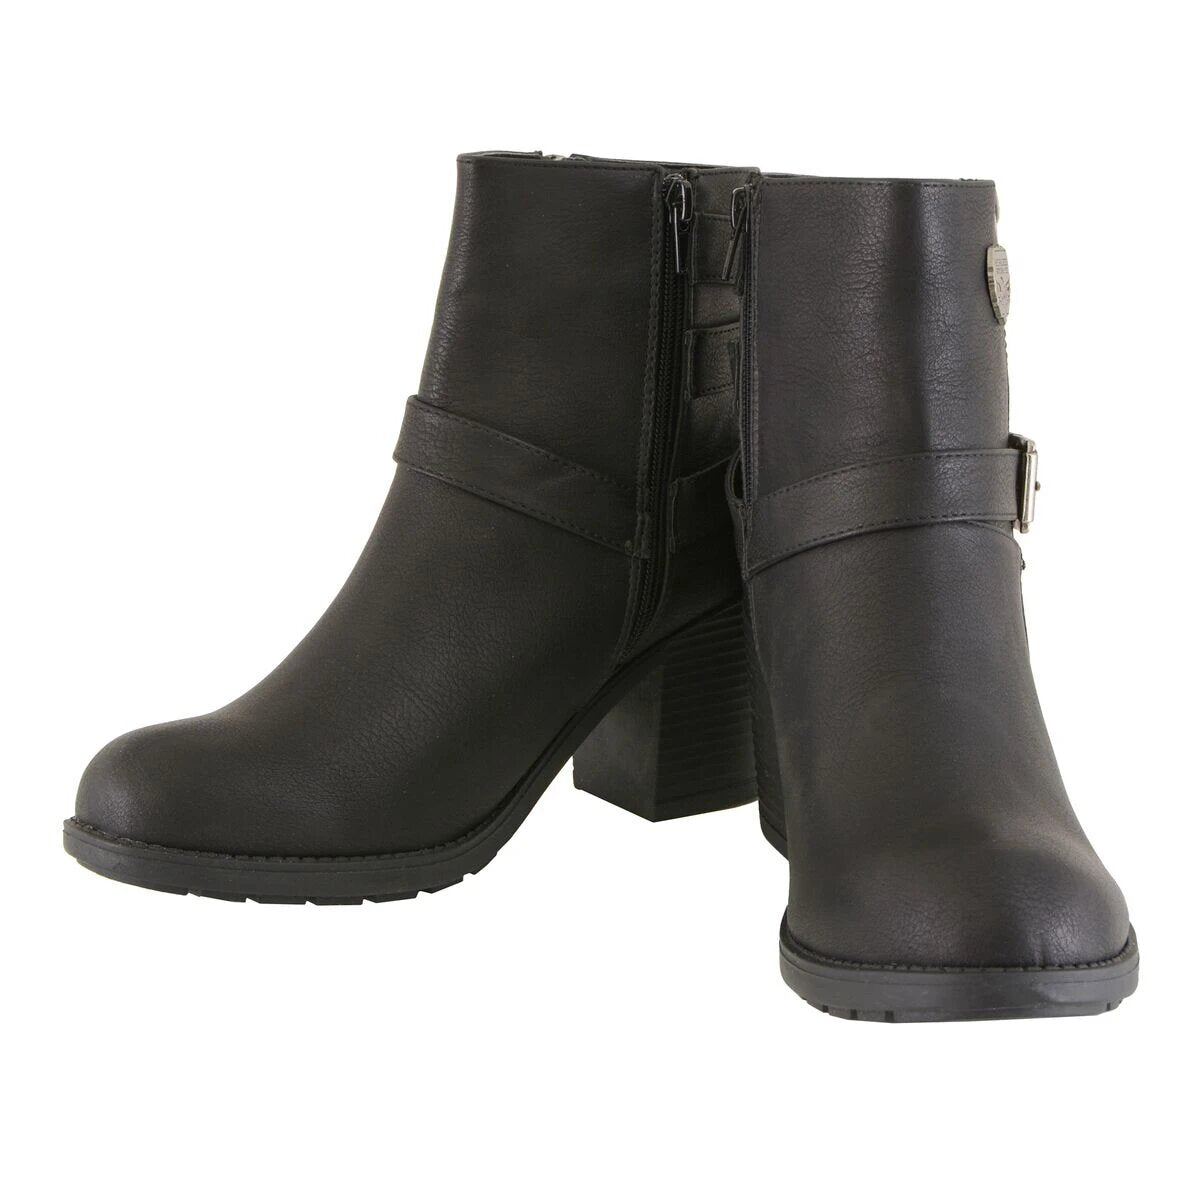 Womens Black Boots with Side Zipper and Triple Buckle Adjustment